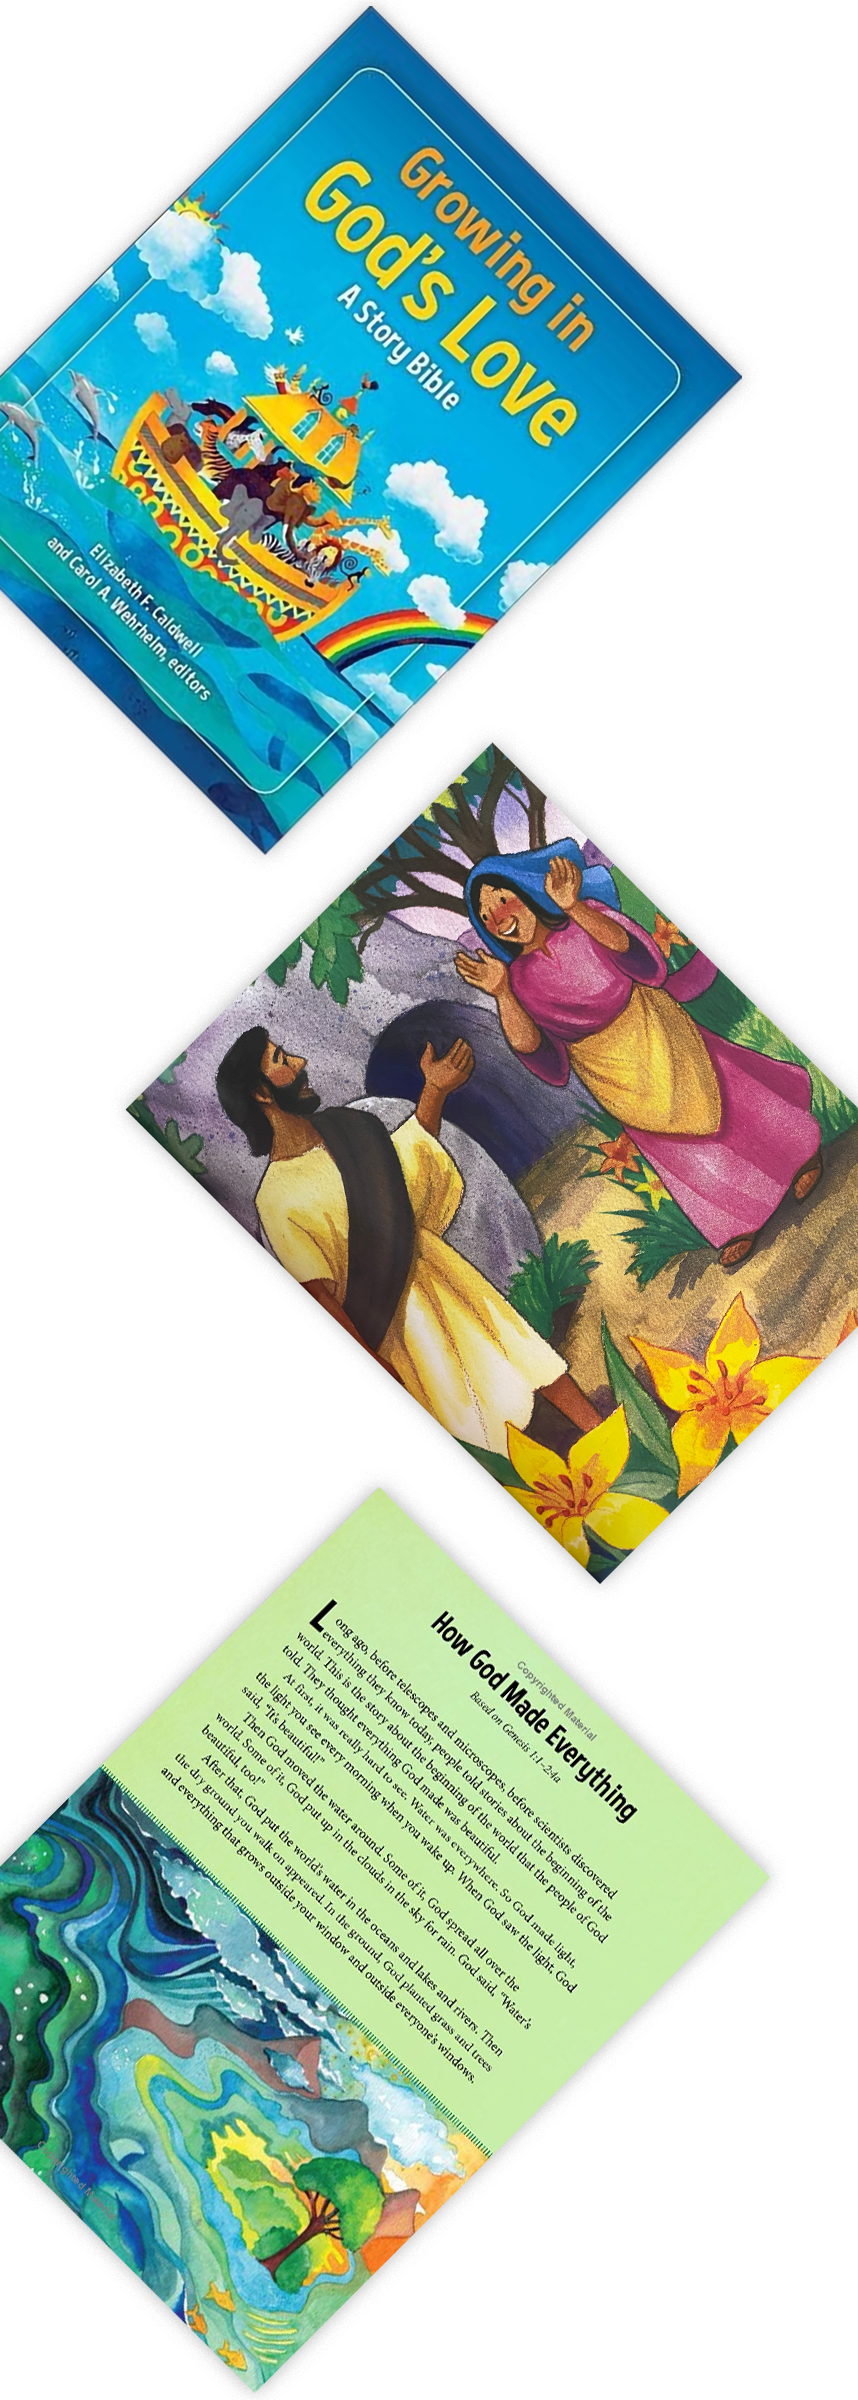 Three colorful panels of a children's Bible